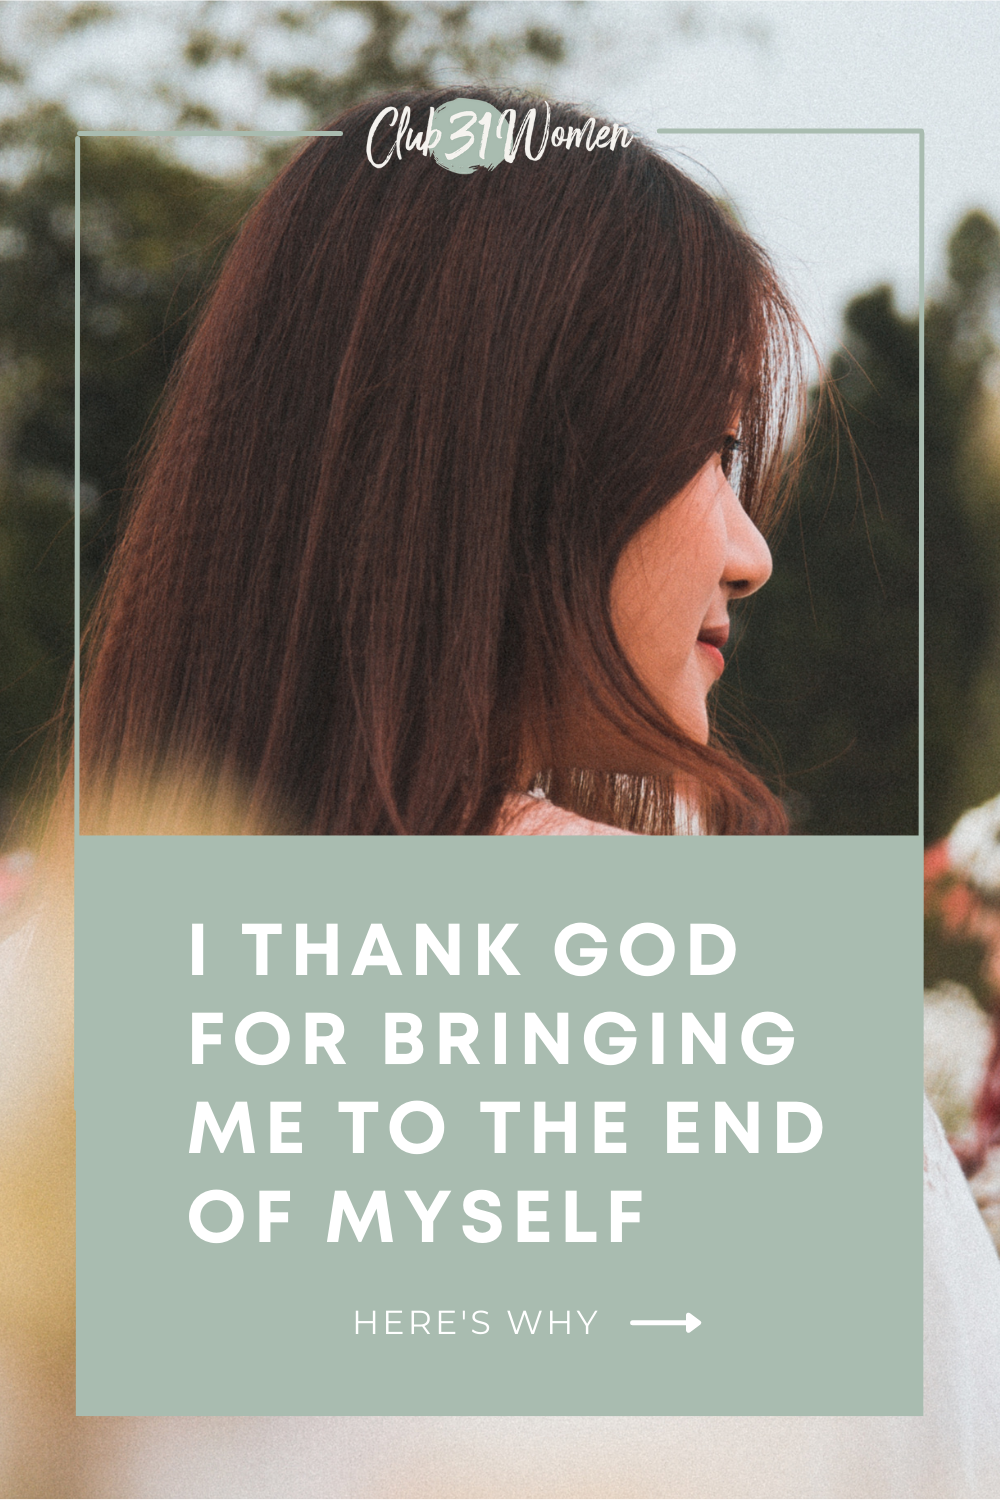 When failure seems to be looming over us, how can we cling to God's truth and grace? How can we know He has us through the heartache? via @Club31Women